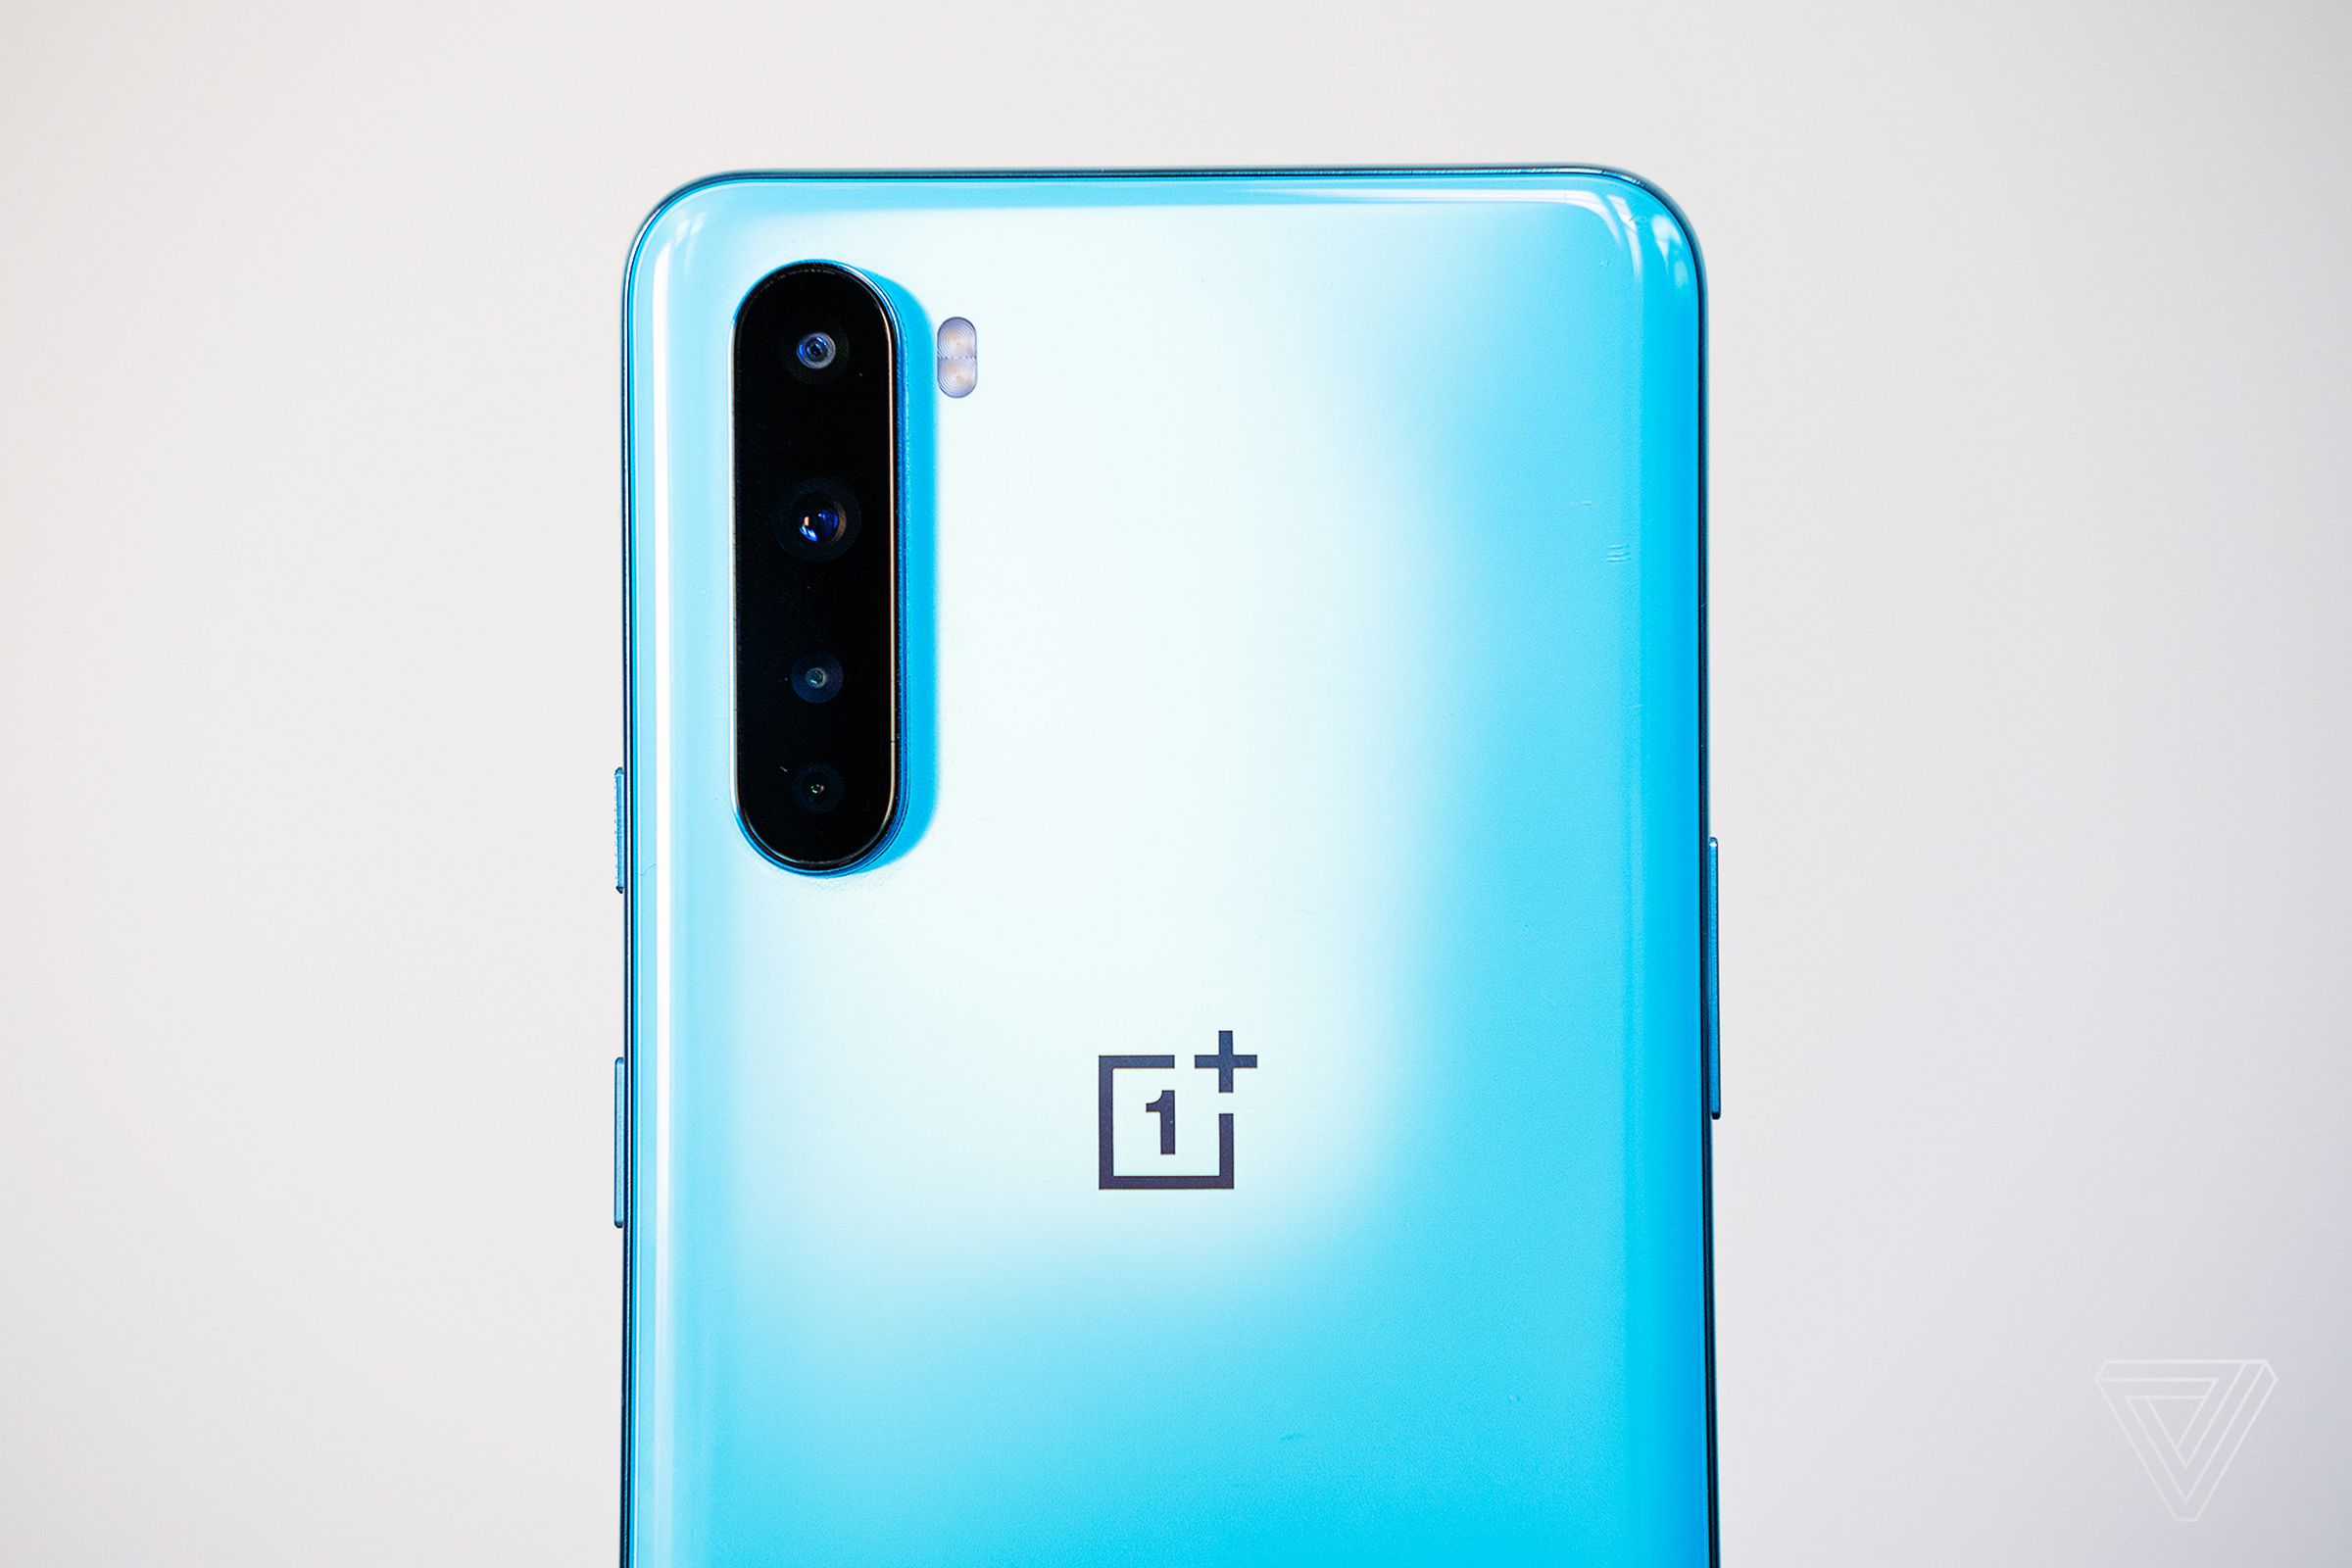 The OnePlus Nord shares a lot of the DNA of the OnePlus 8.